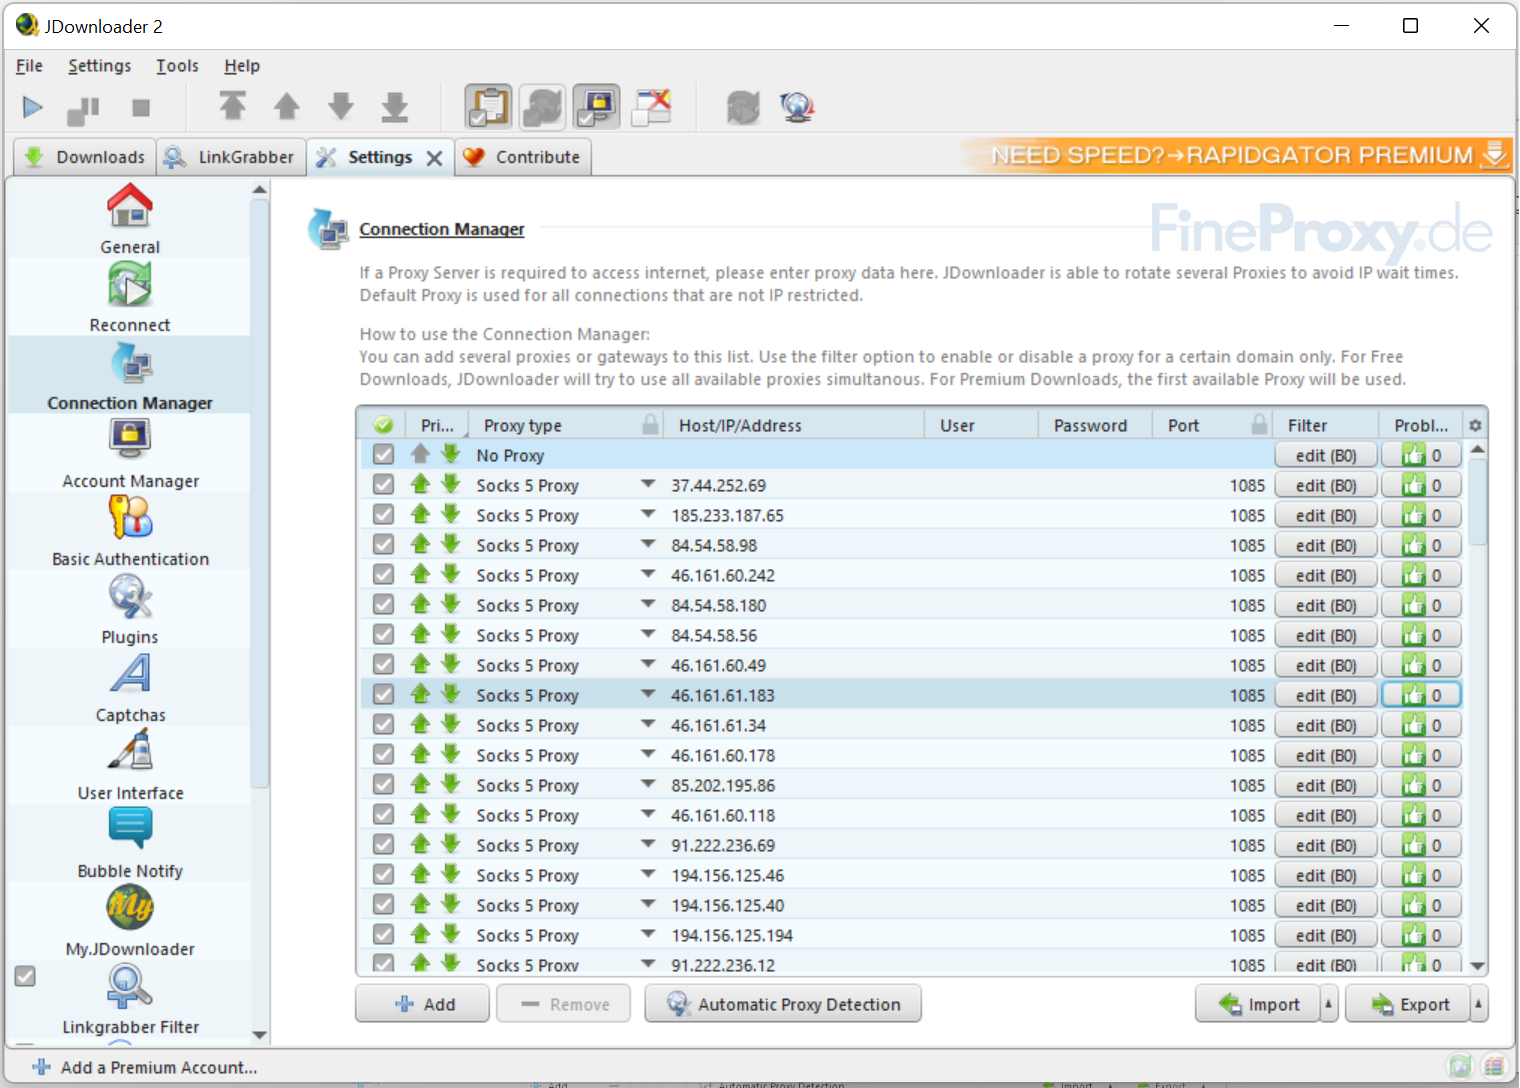 Setting Up and Using Proxy Servers in JDownloader 2